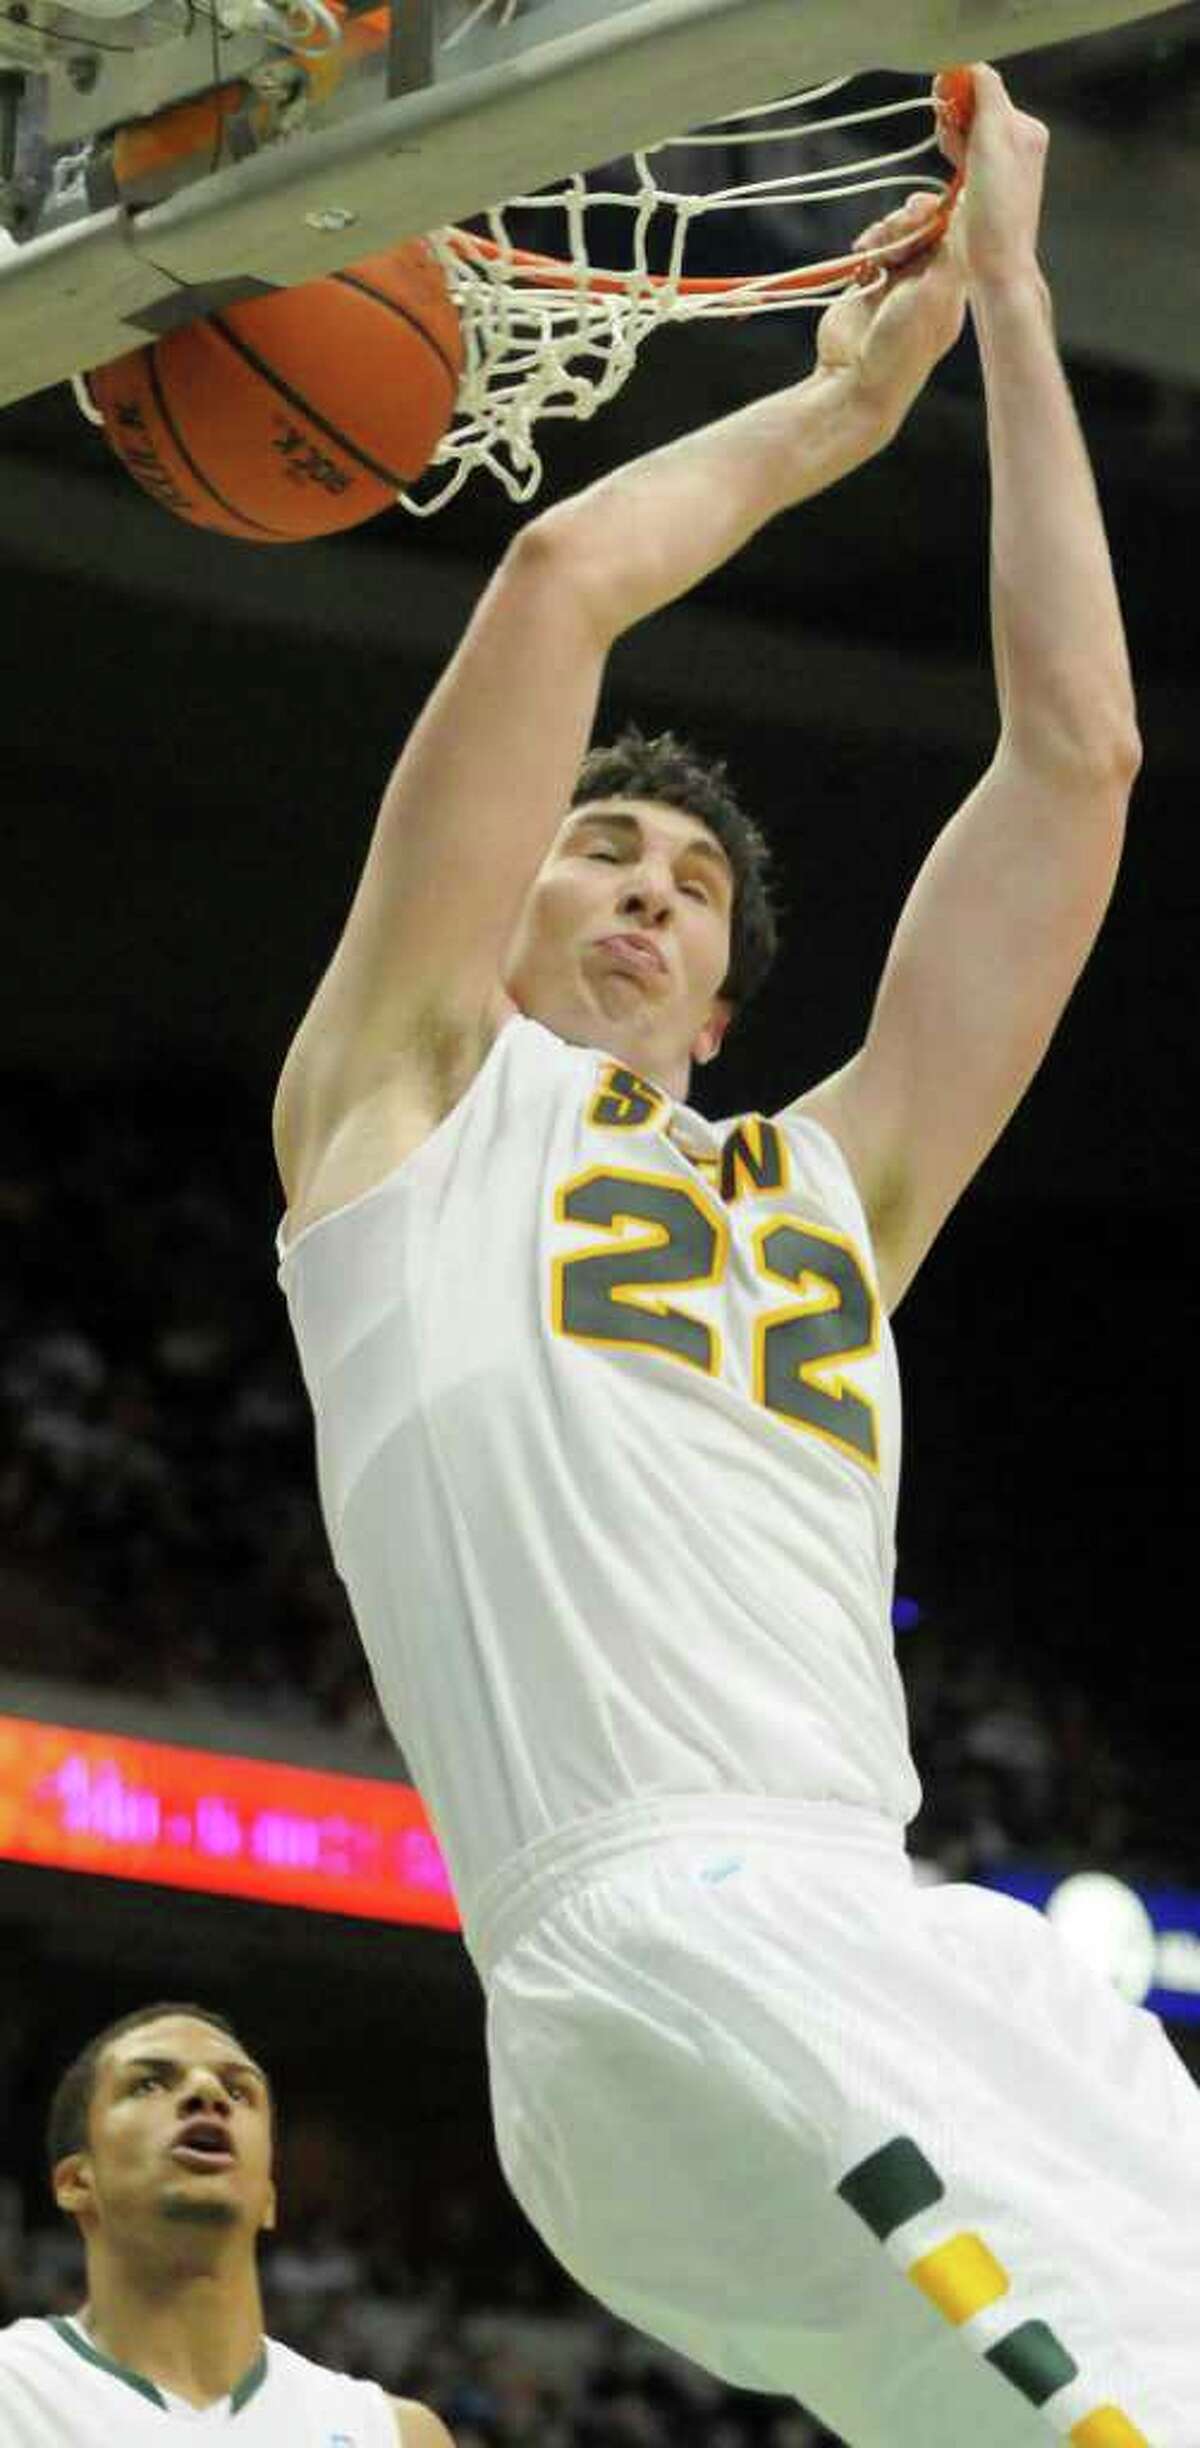 No. 22, Siena's Ryan Rossiter, slams home a dunk in College Basketball vs. Butler at The Times Union Center, in Albany, NY, on Tuesday, Nov. 23, 2010. Siena lost. Photos for Daily Sports Dept. coverage. (Luanne M. Ferris / Times Union)